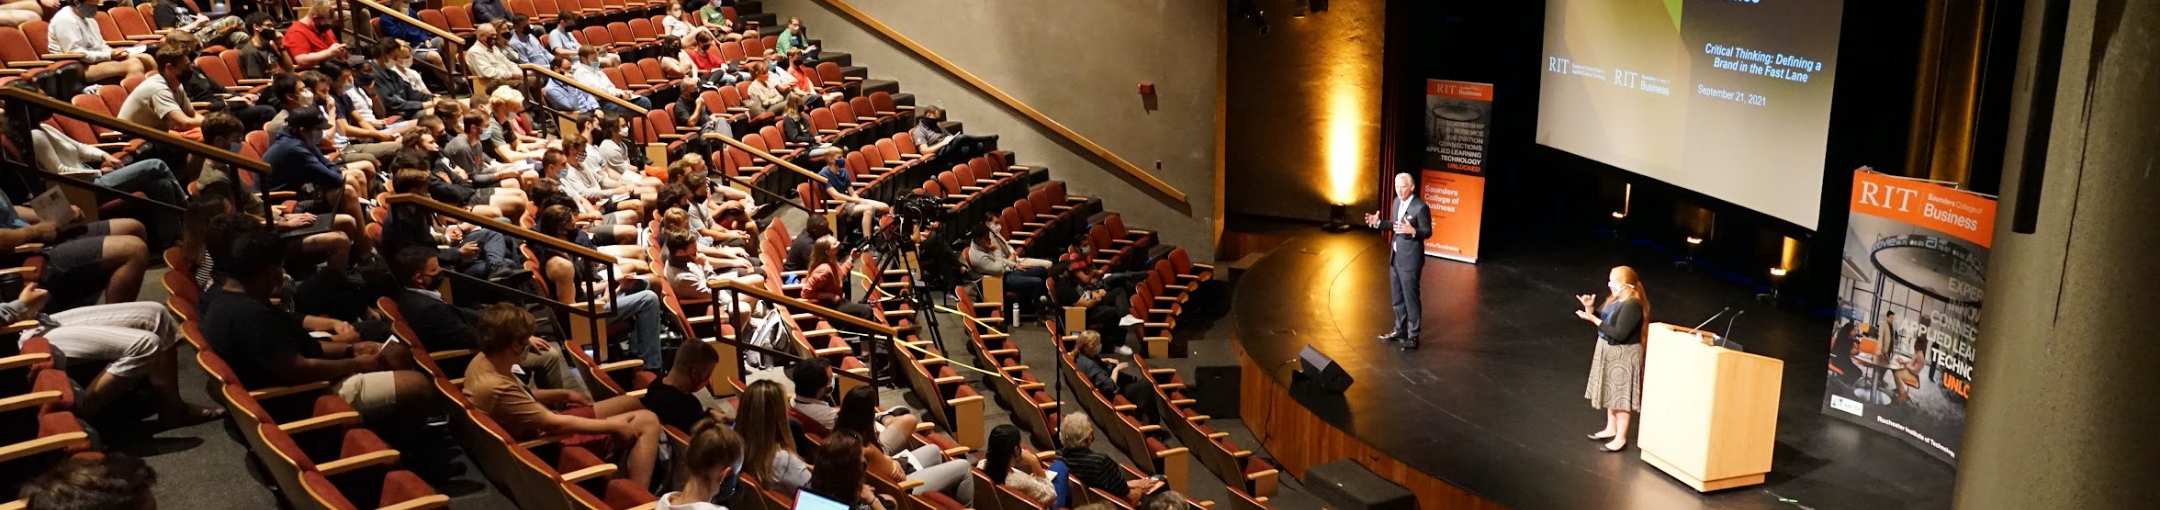 Speaker addressing a large lecture hall